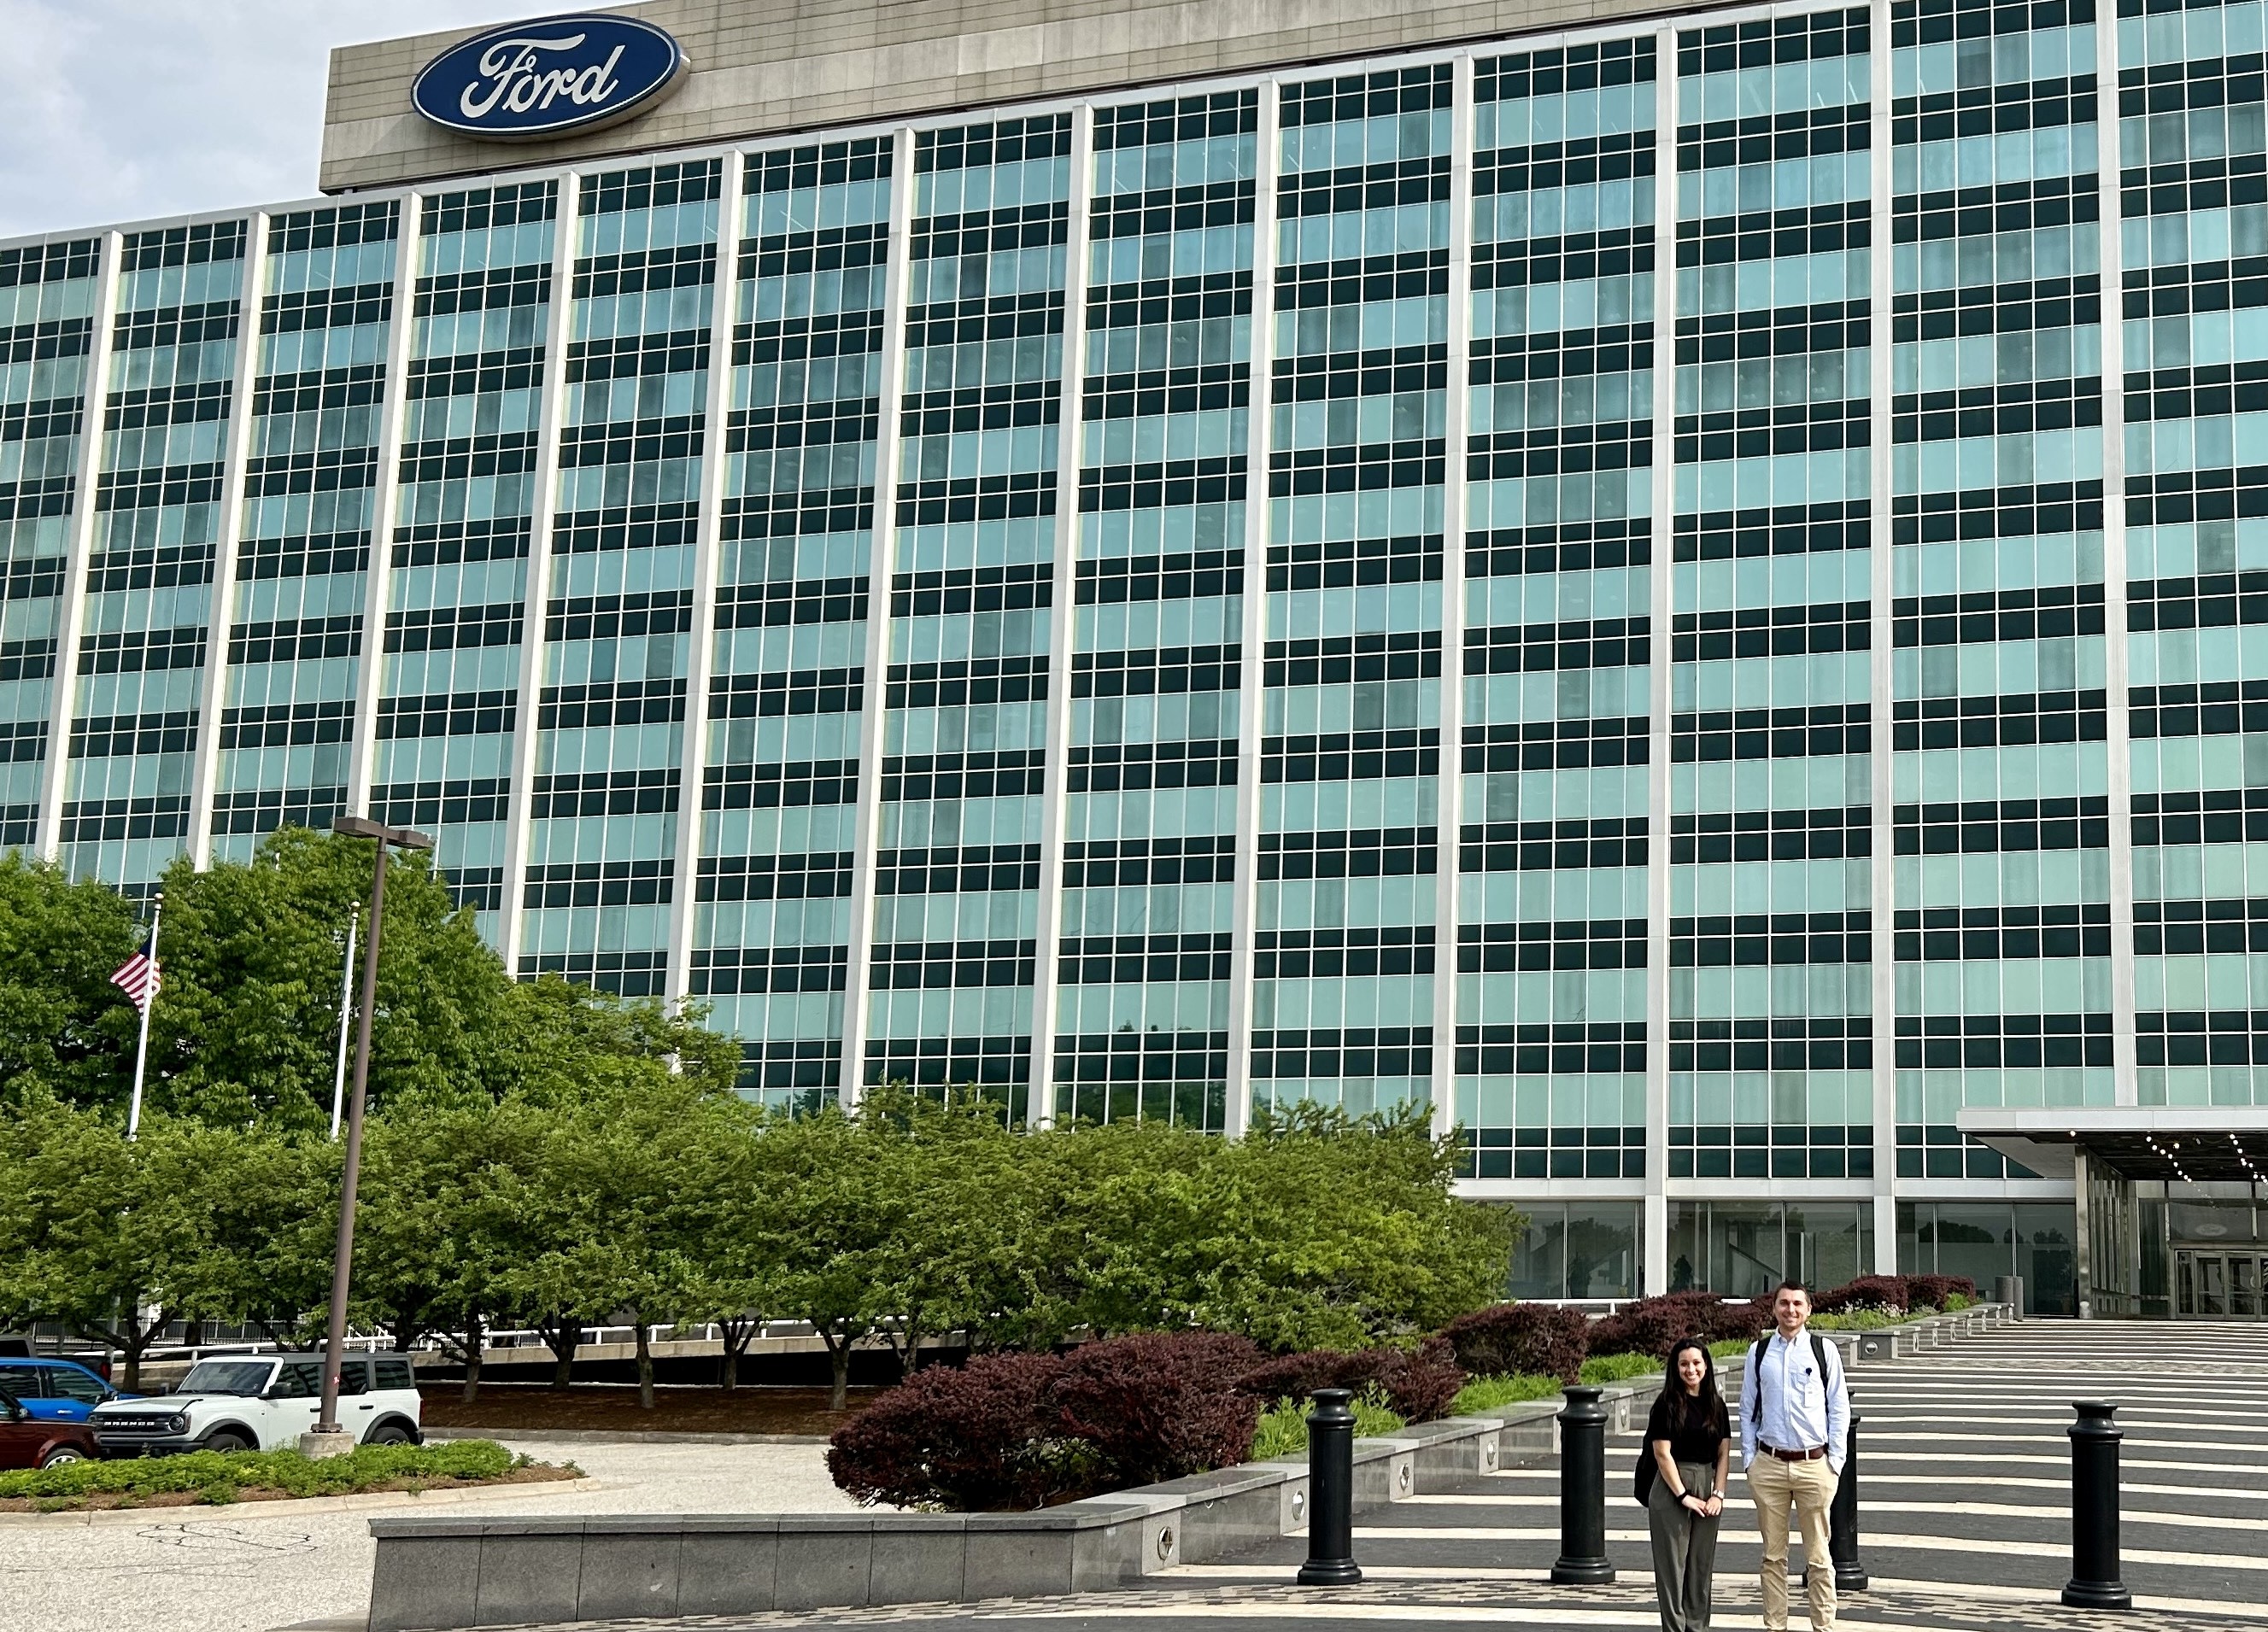 Grad student Connor Eichenauer stands in front of the Ford Motor Company's building. In the top left corner, Ford is visible on the building.